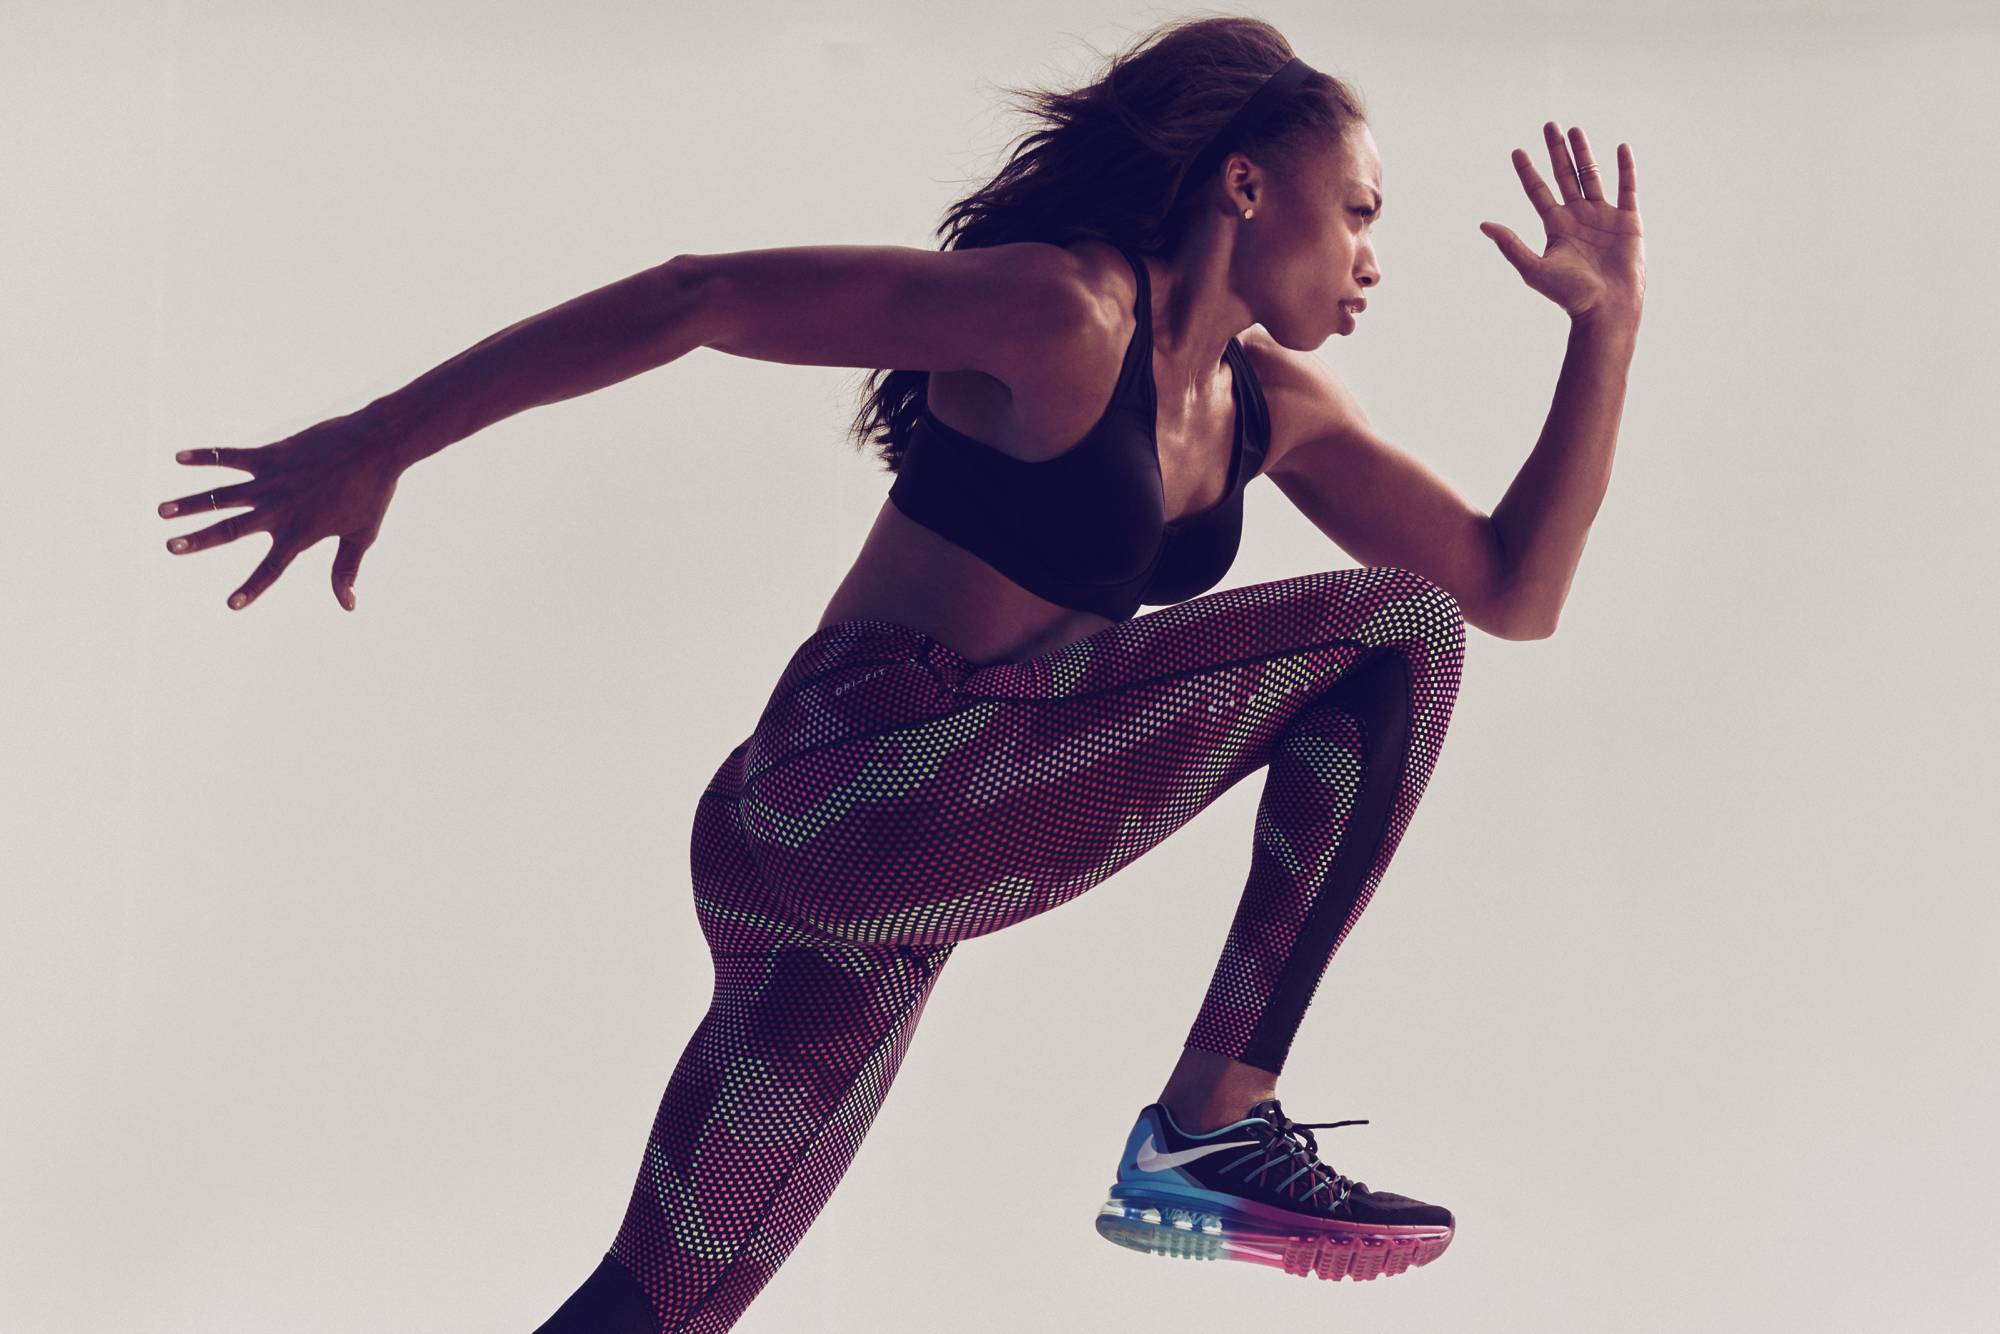 NIKE Spring 2015 Athlete Campaign